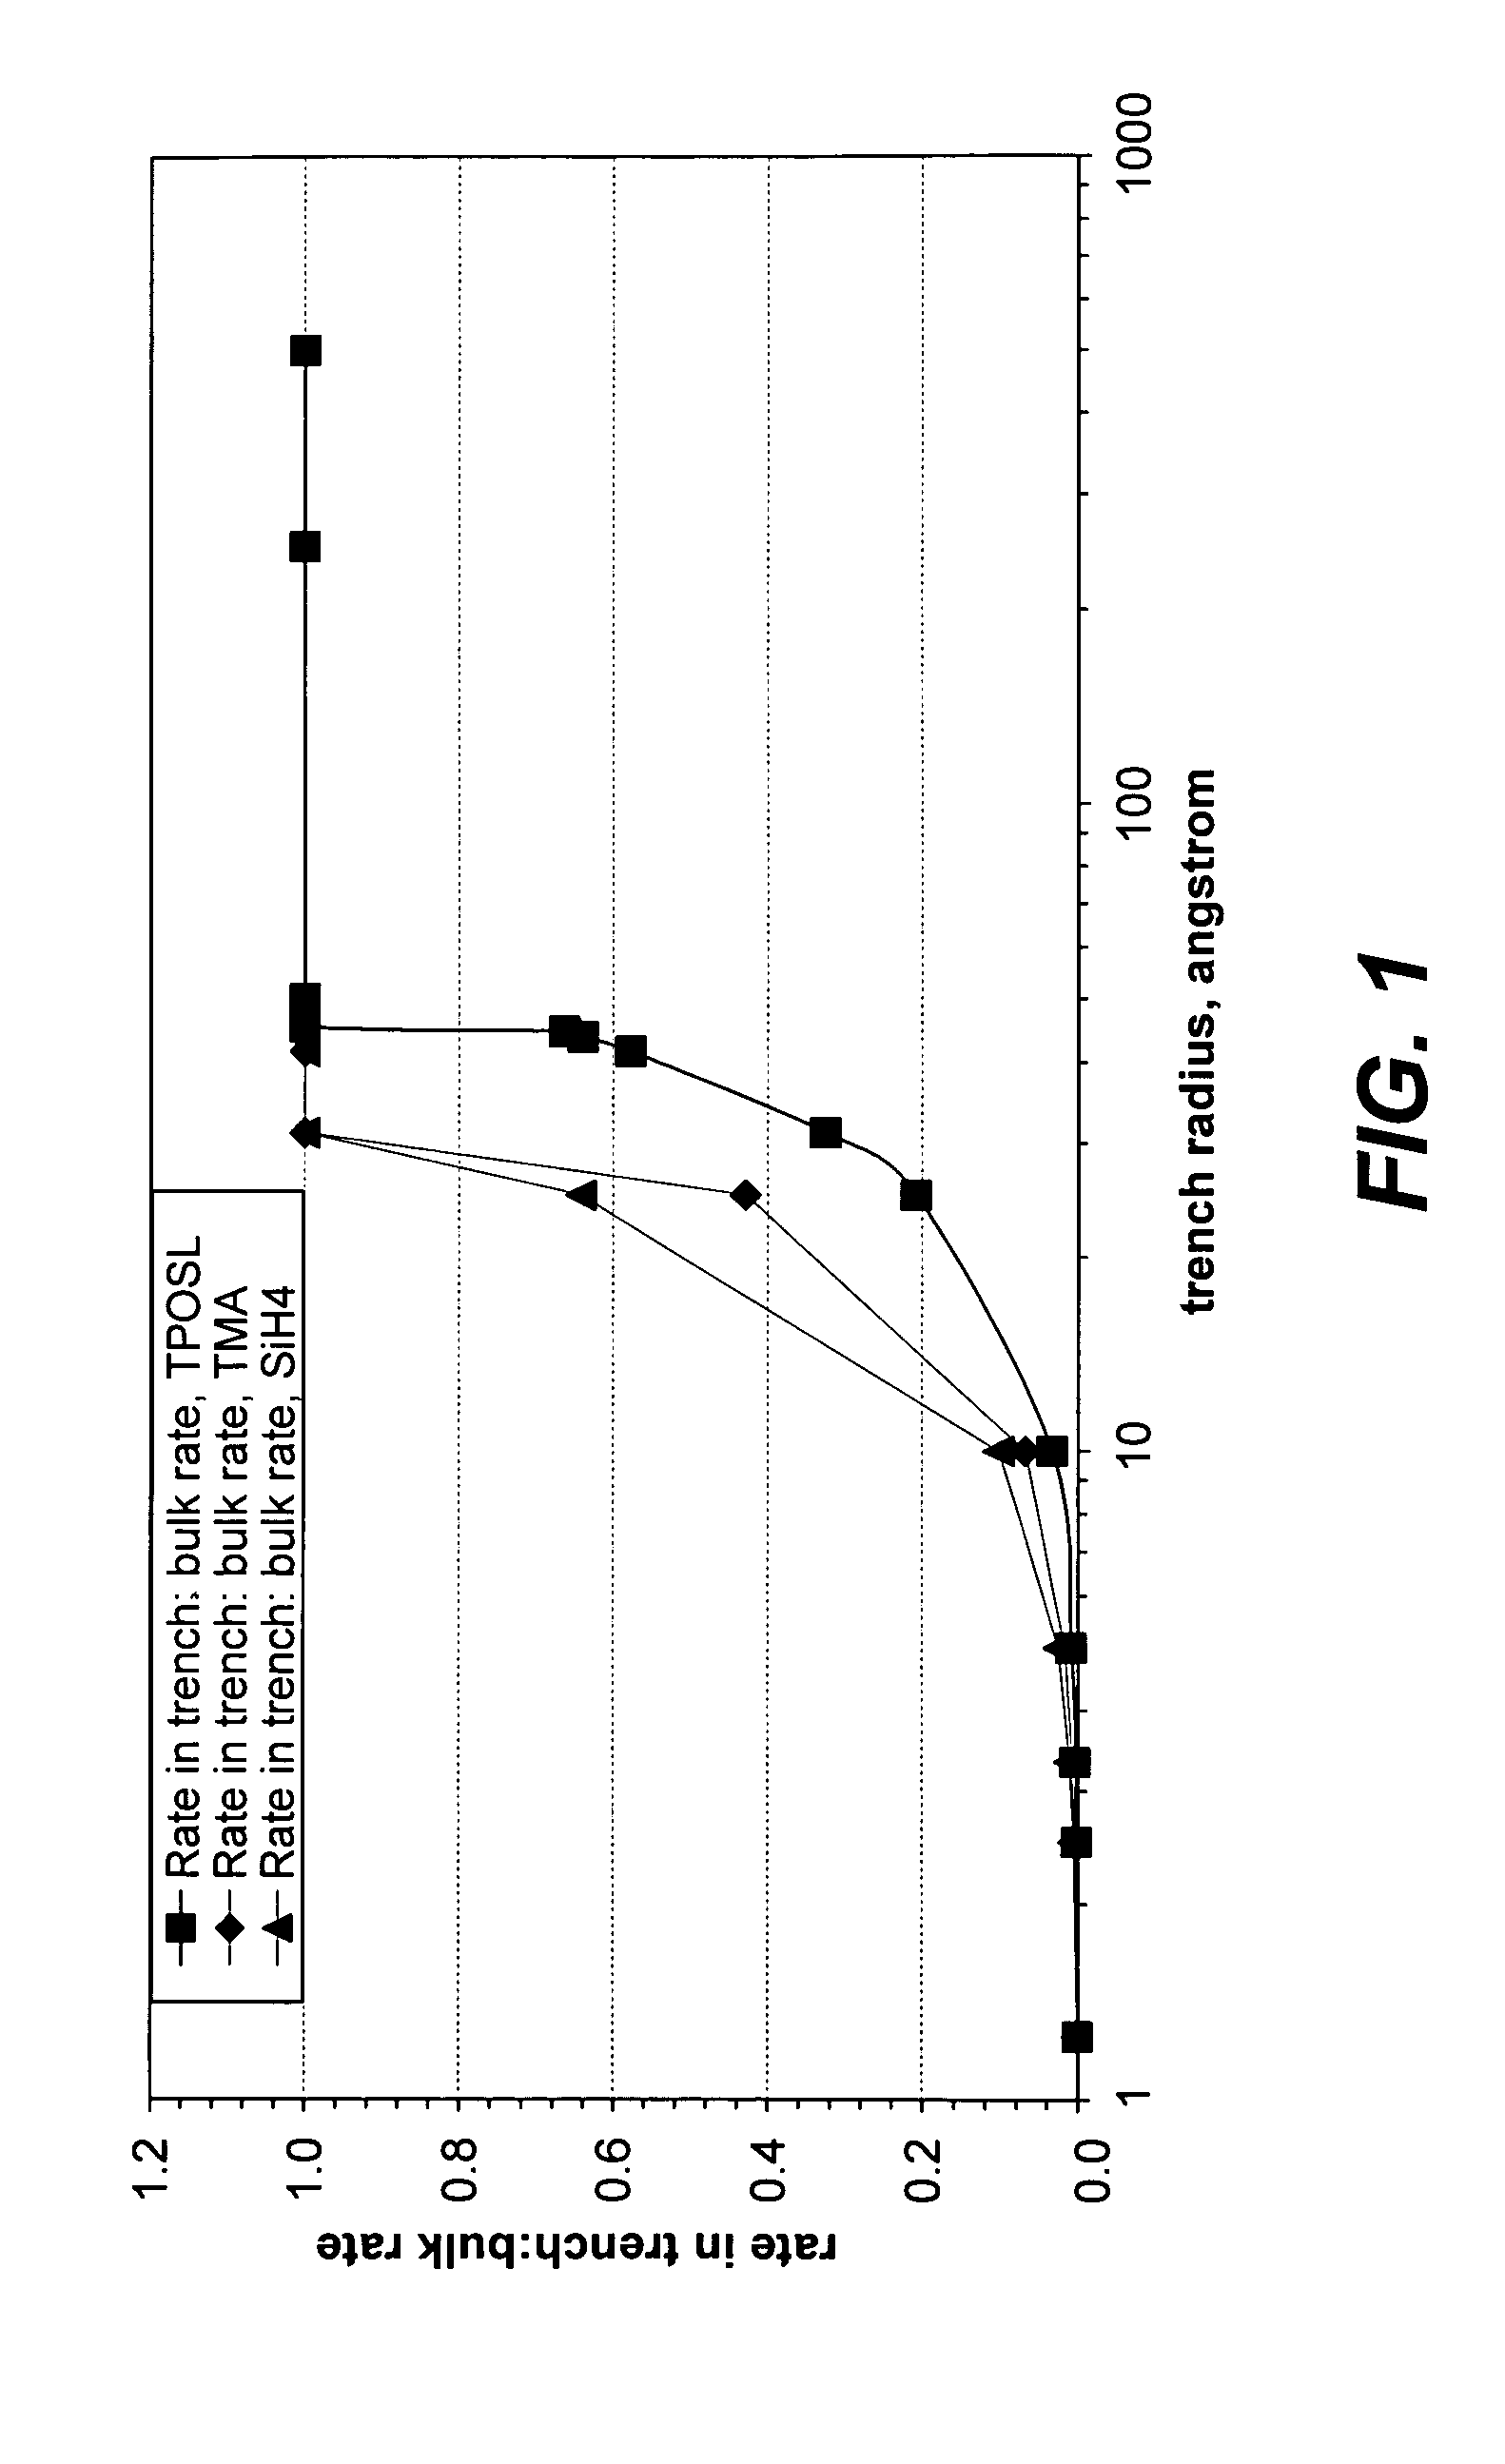 Pulsed deposition layer gap fill with expansion material